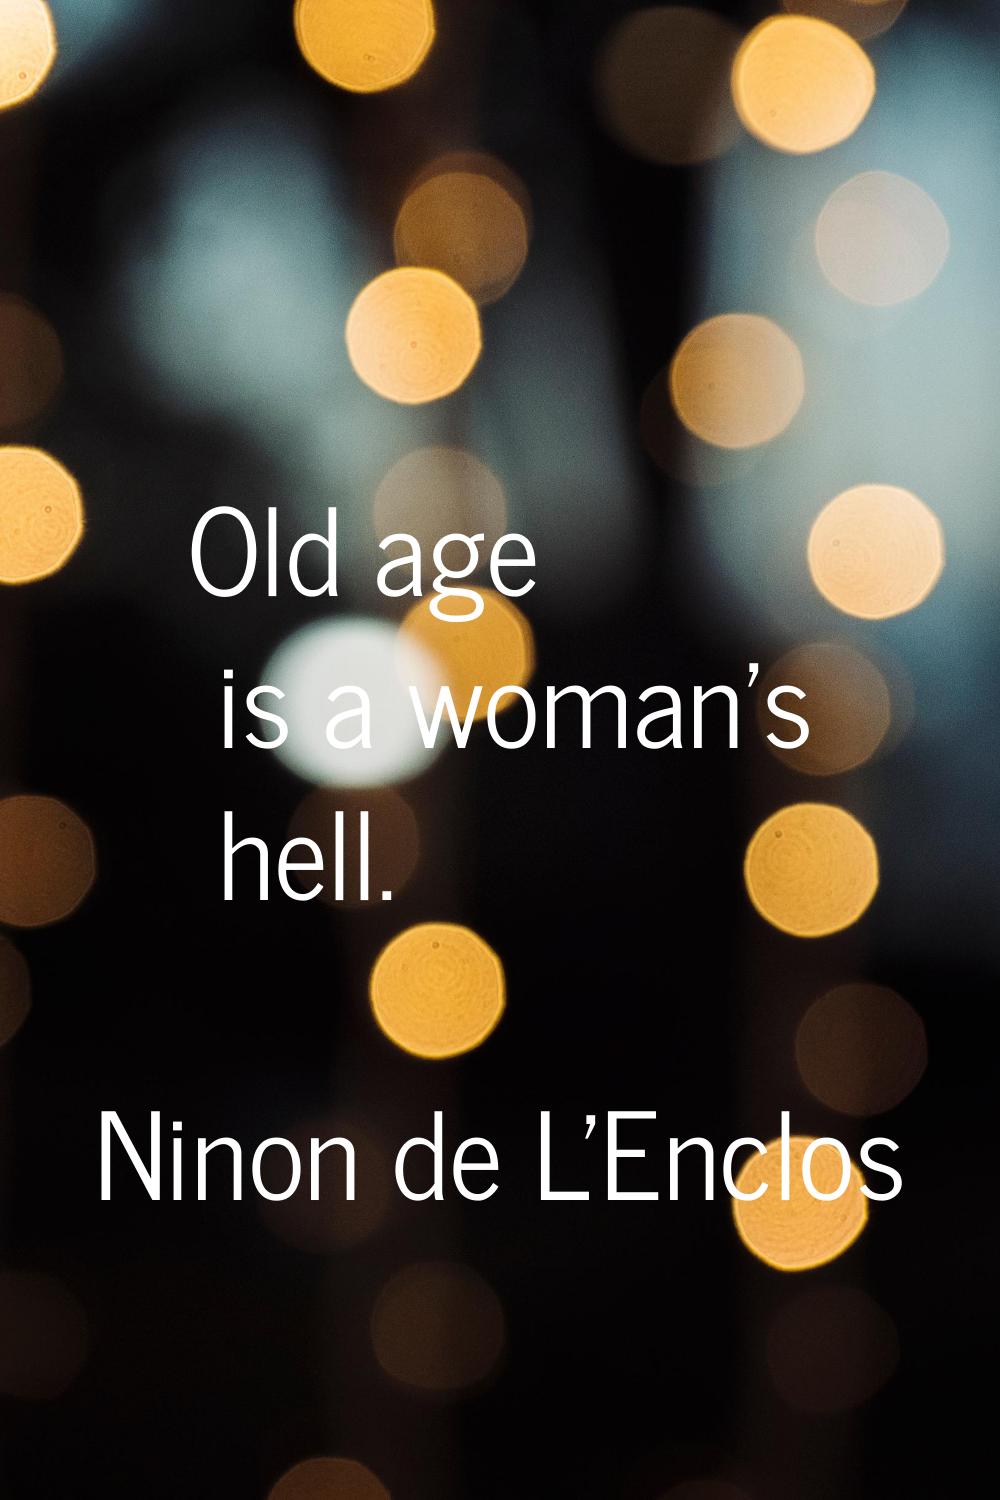 Old age is a woman's hell.